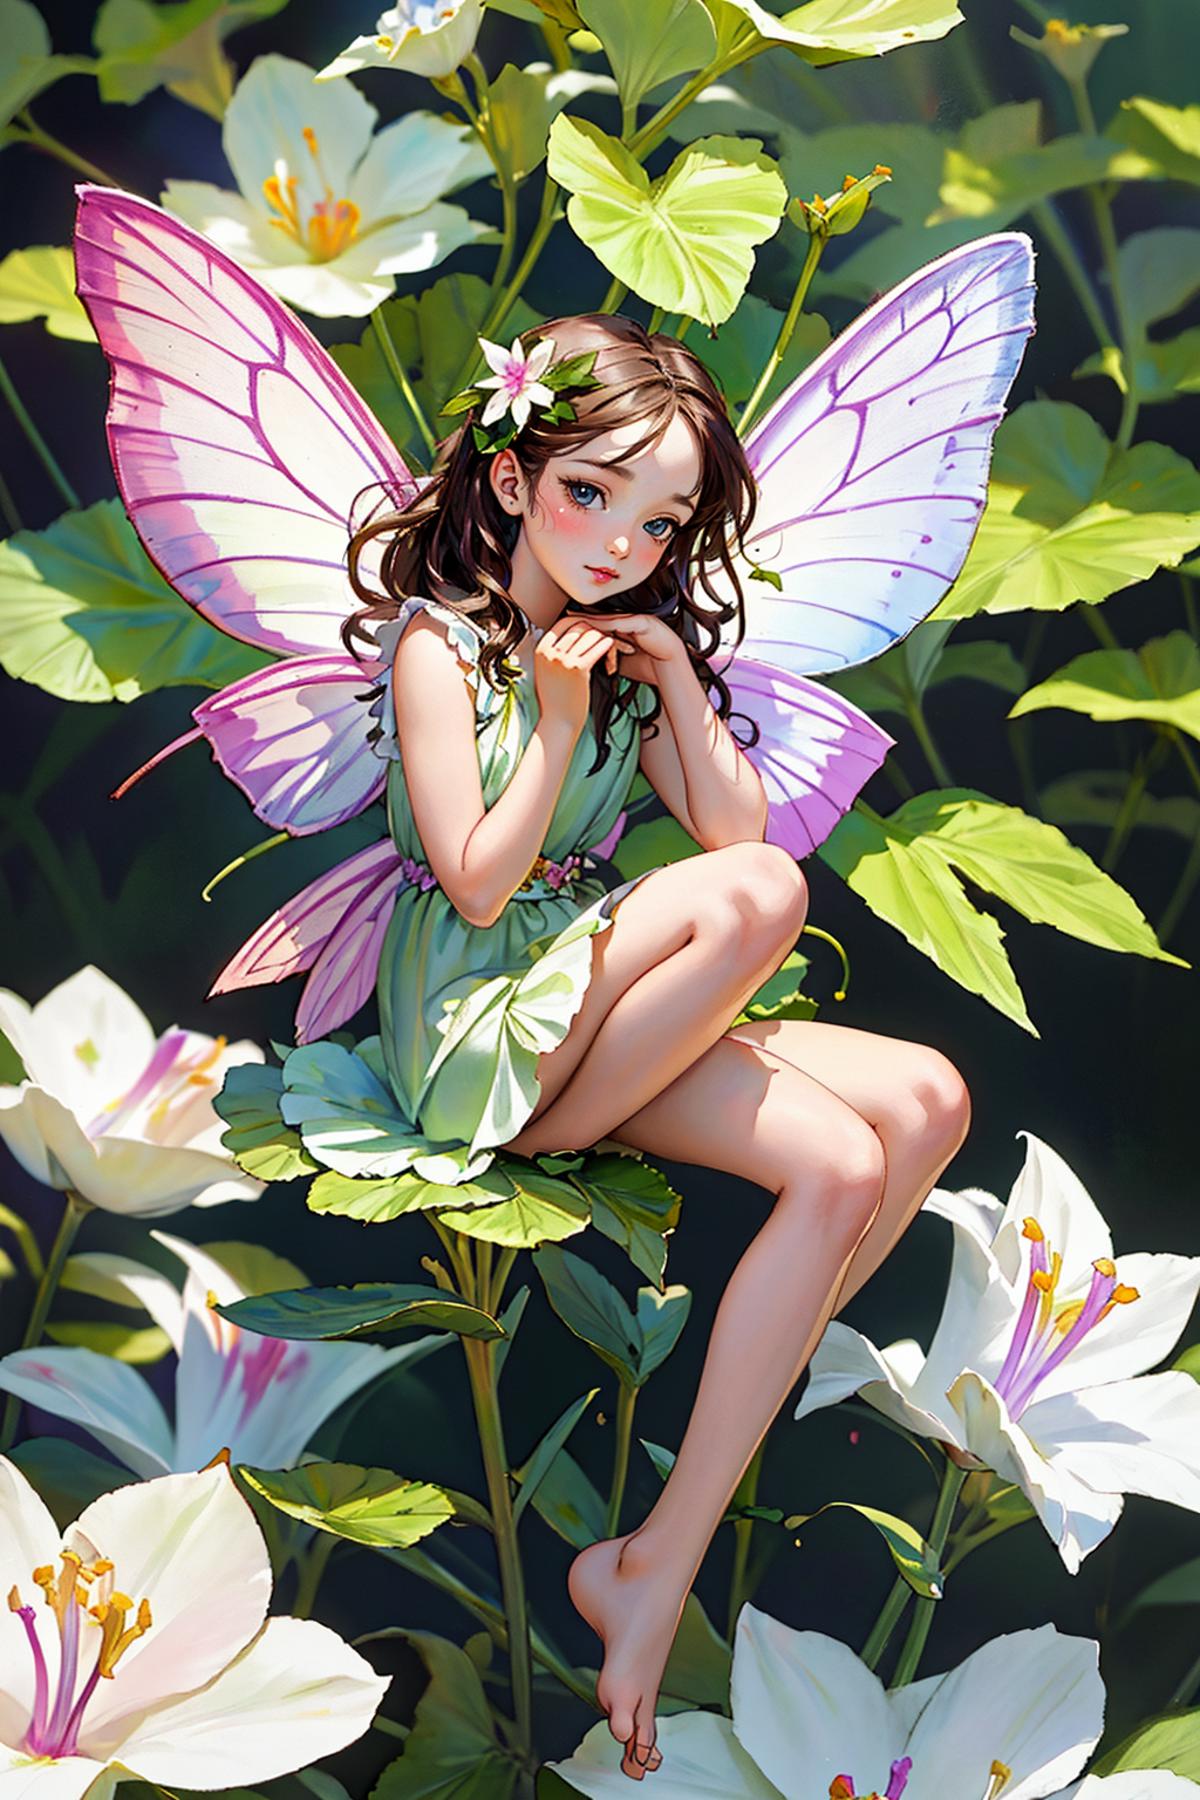 Faeia and the Flower Fae - by EDG image by EDG